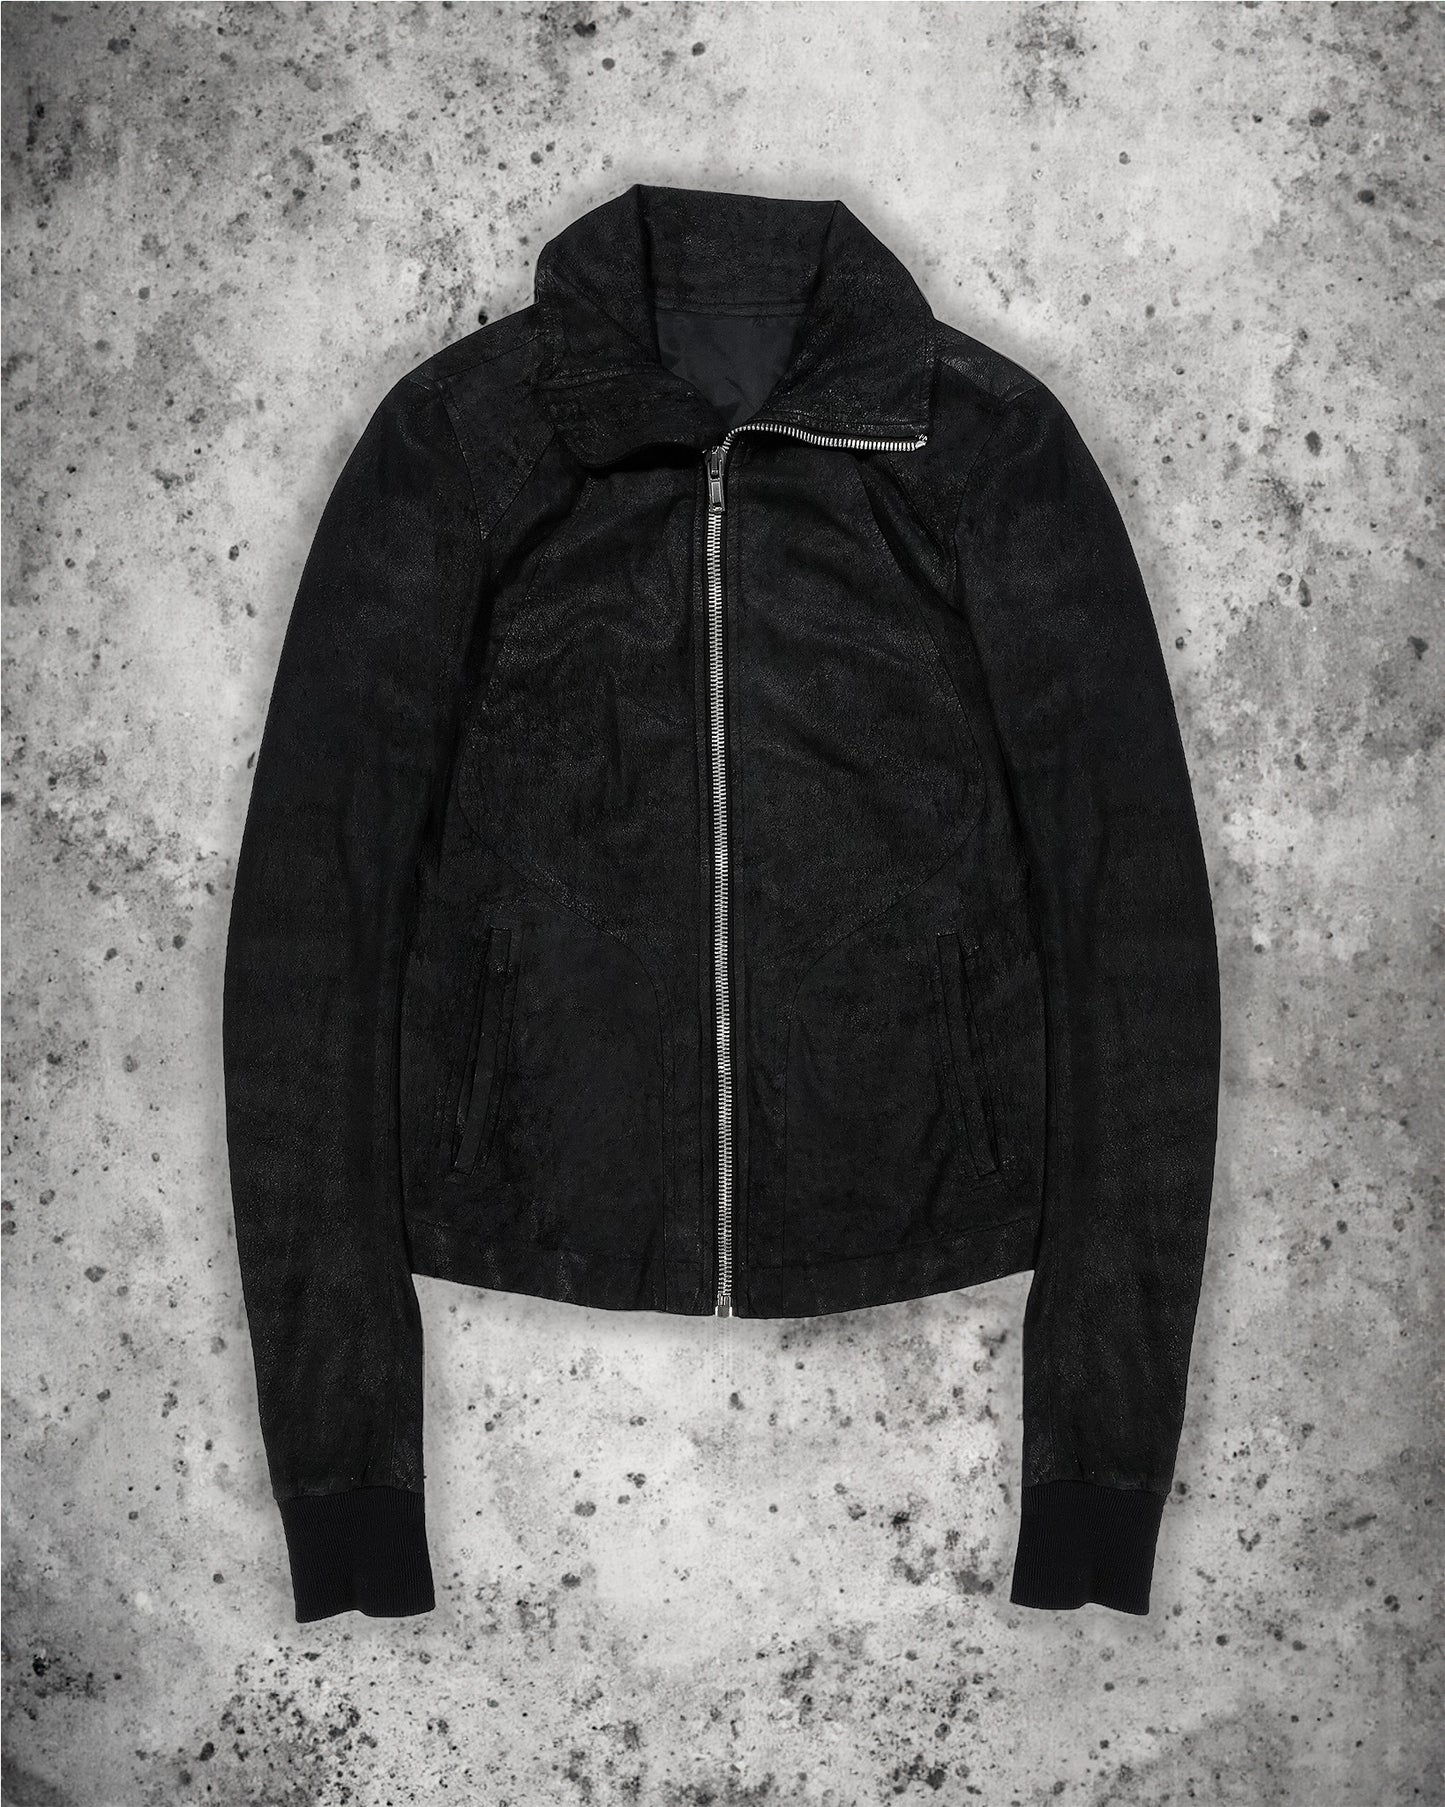 Rick Owens “Blistered” Leather Jacket - FW11 “Limo”